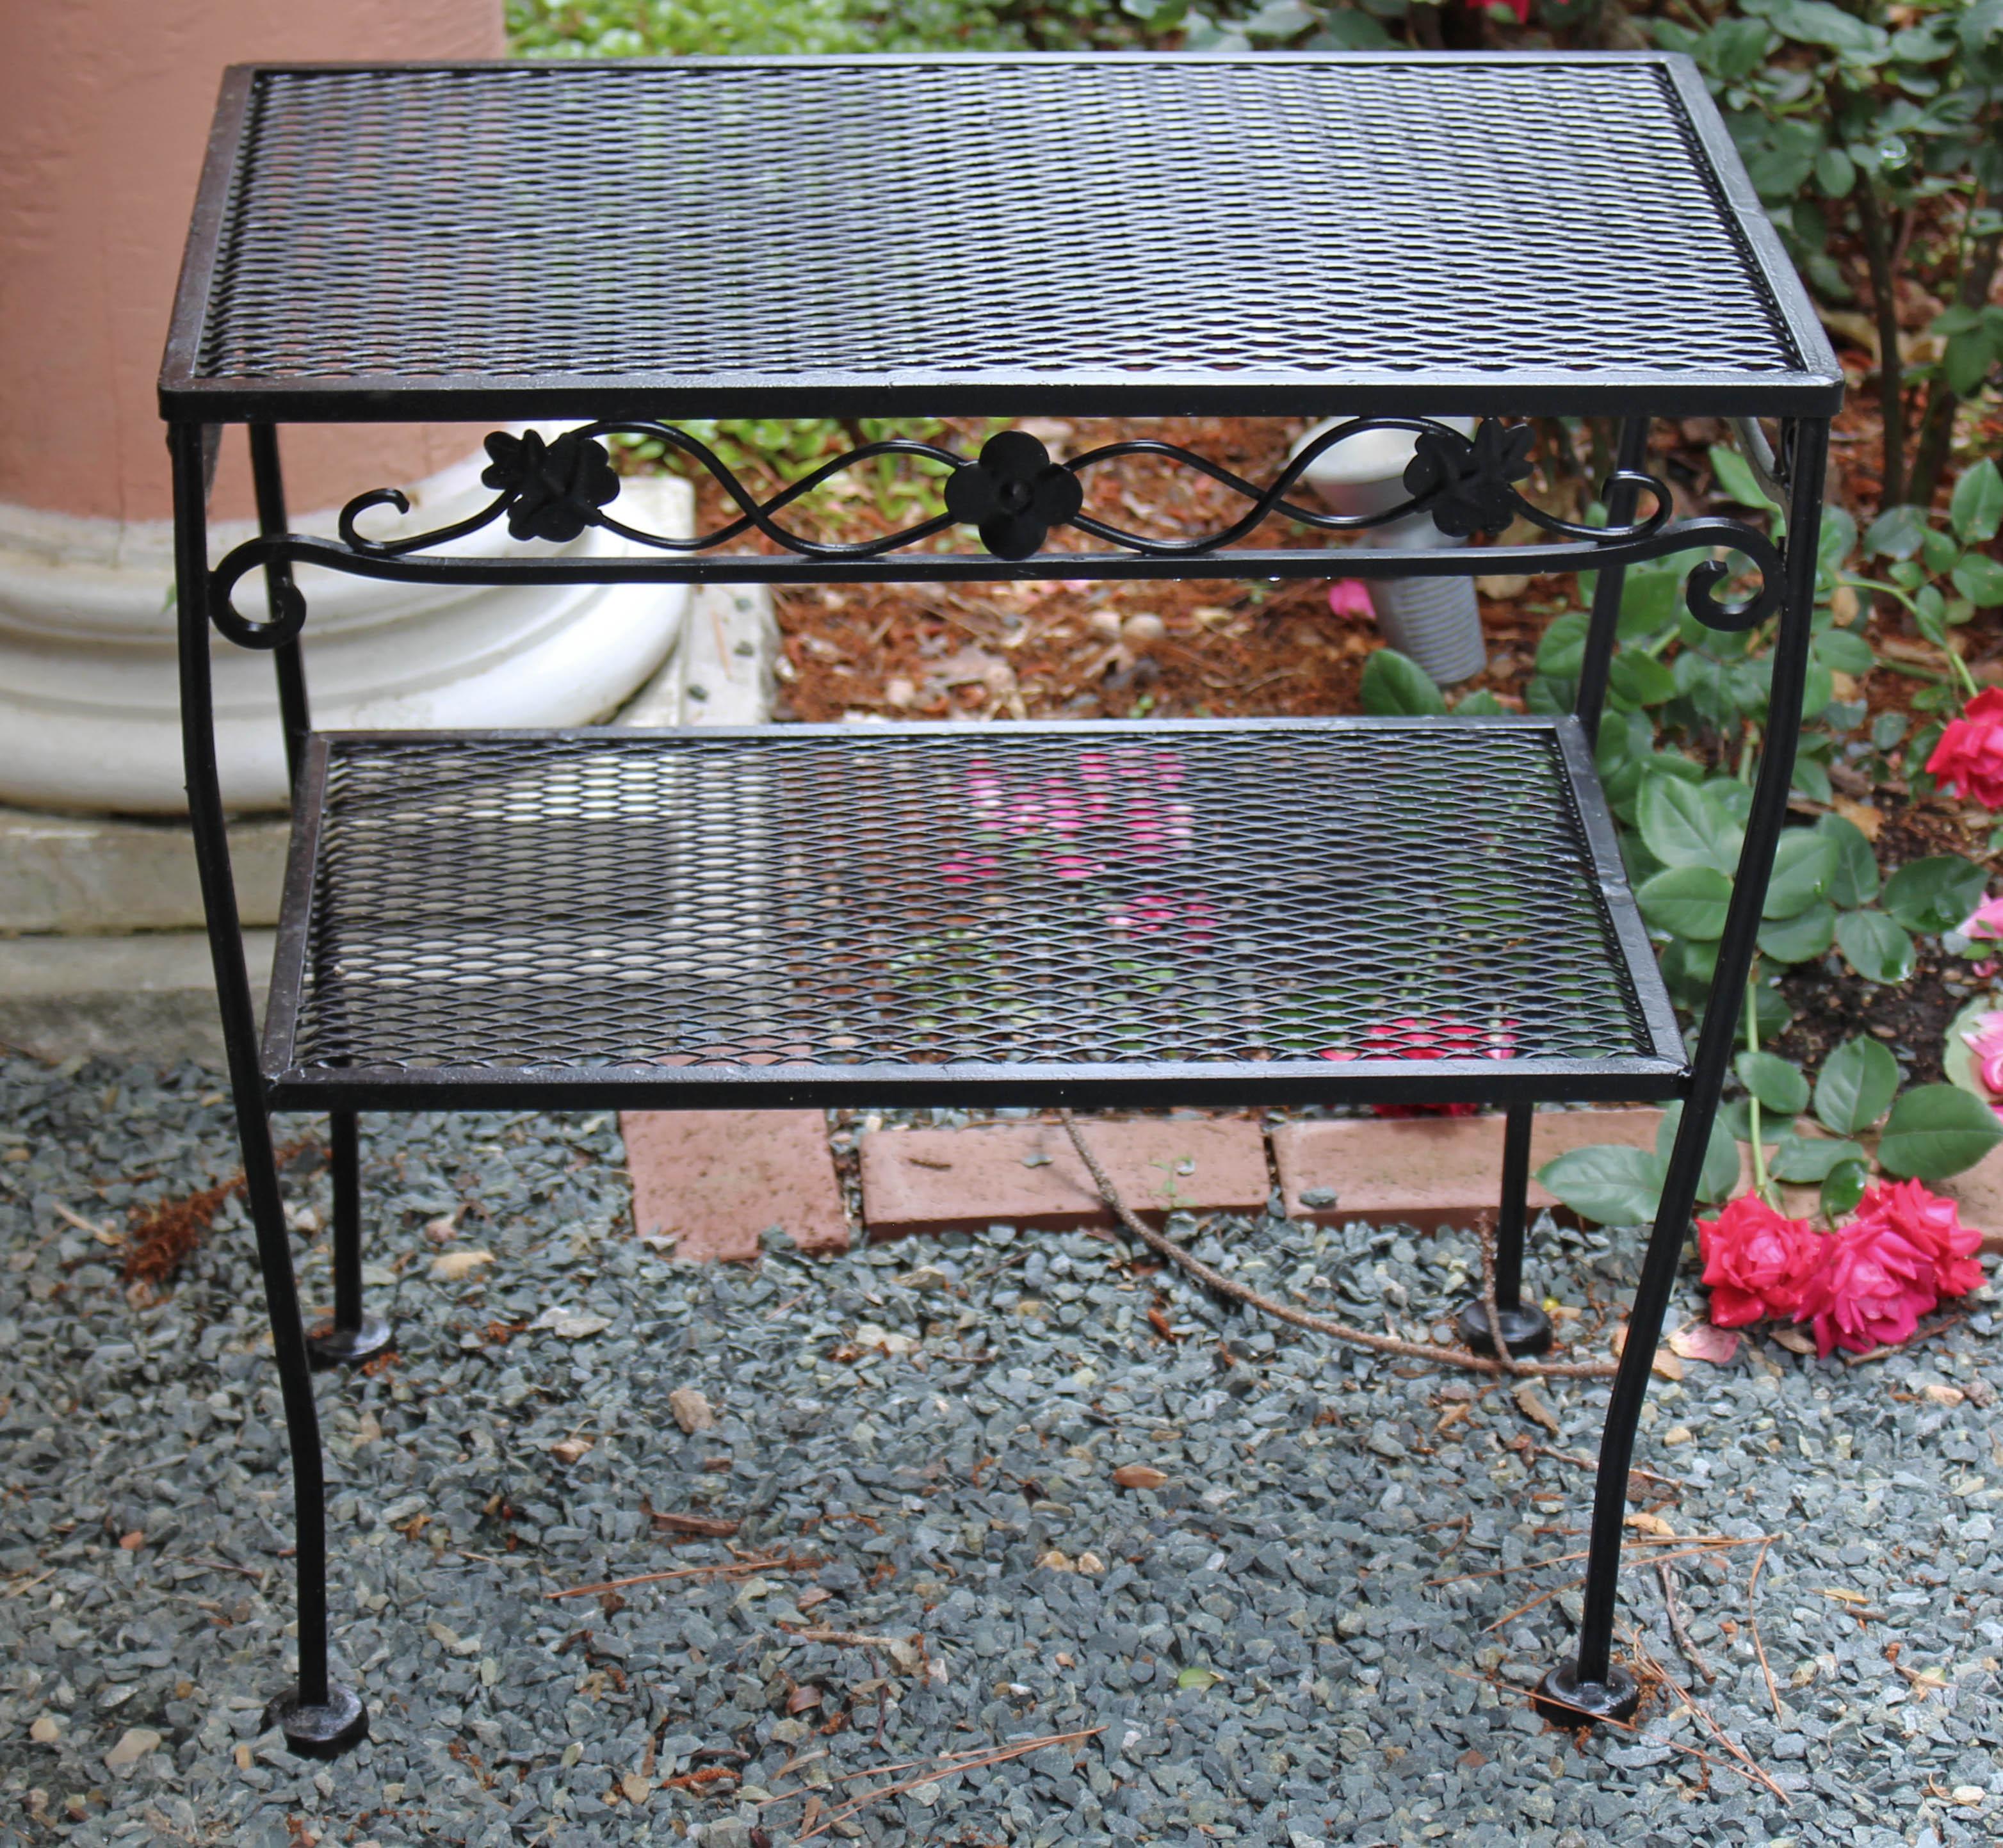 Classic Woodard wrought iron, 2-tier side table. Acquired c.1960 from Style Craft of Chapel Hill. Tendril motif apron surround. Shaped legs. 16